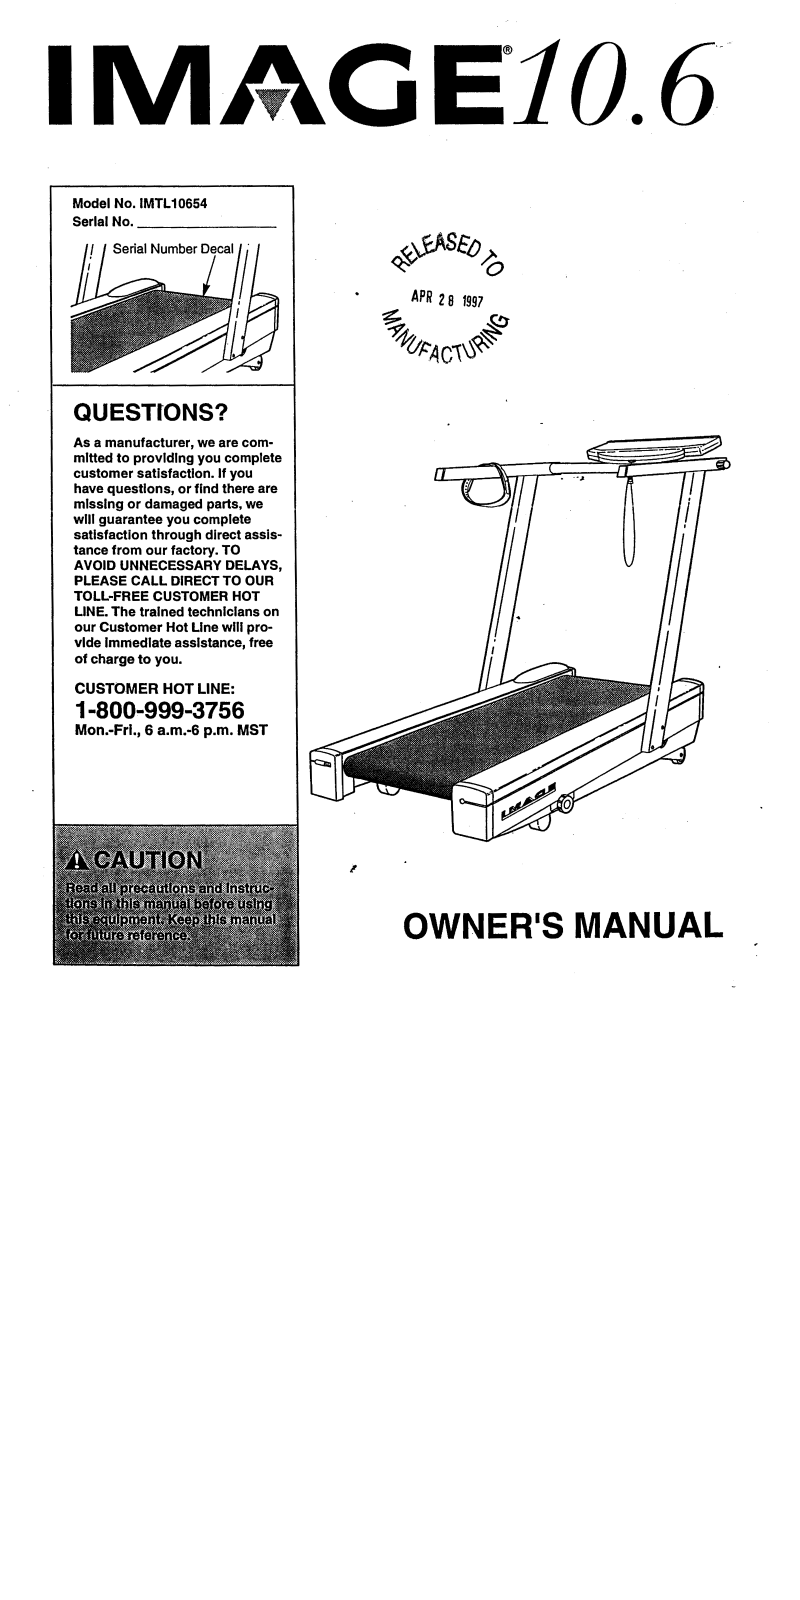 Image IMTL10654 Owner's Manual